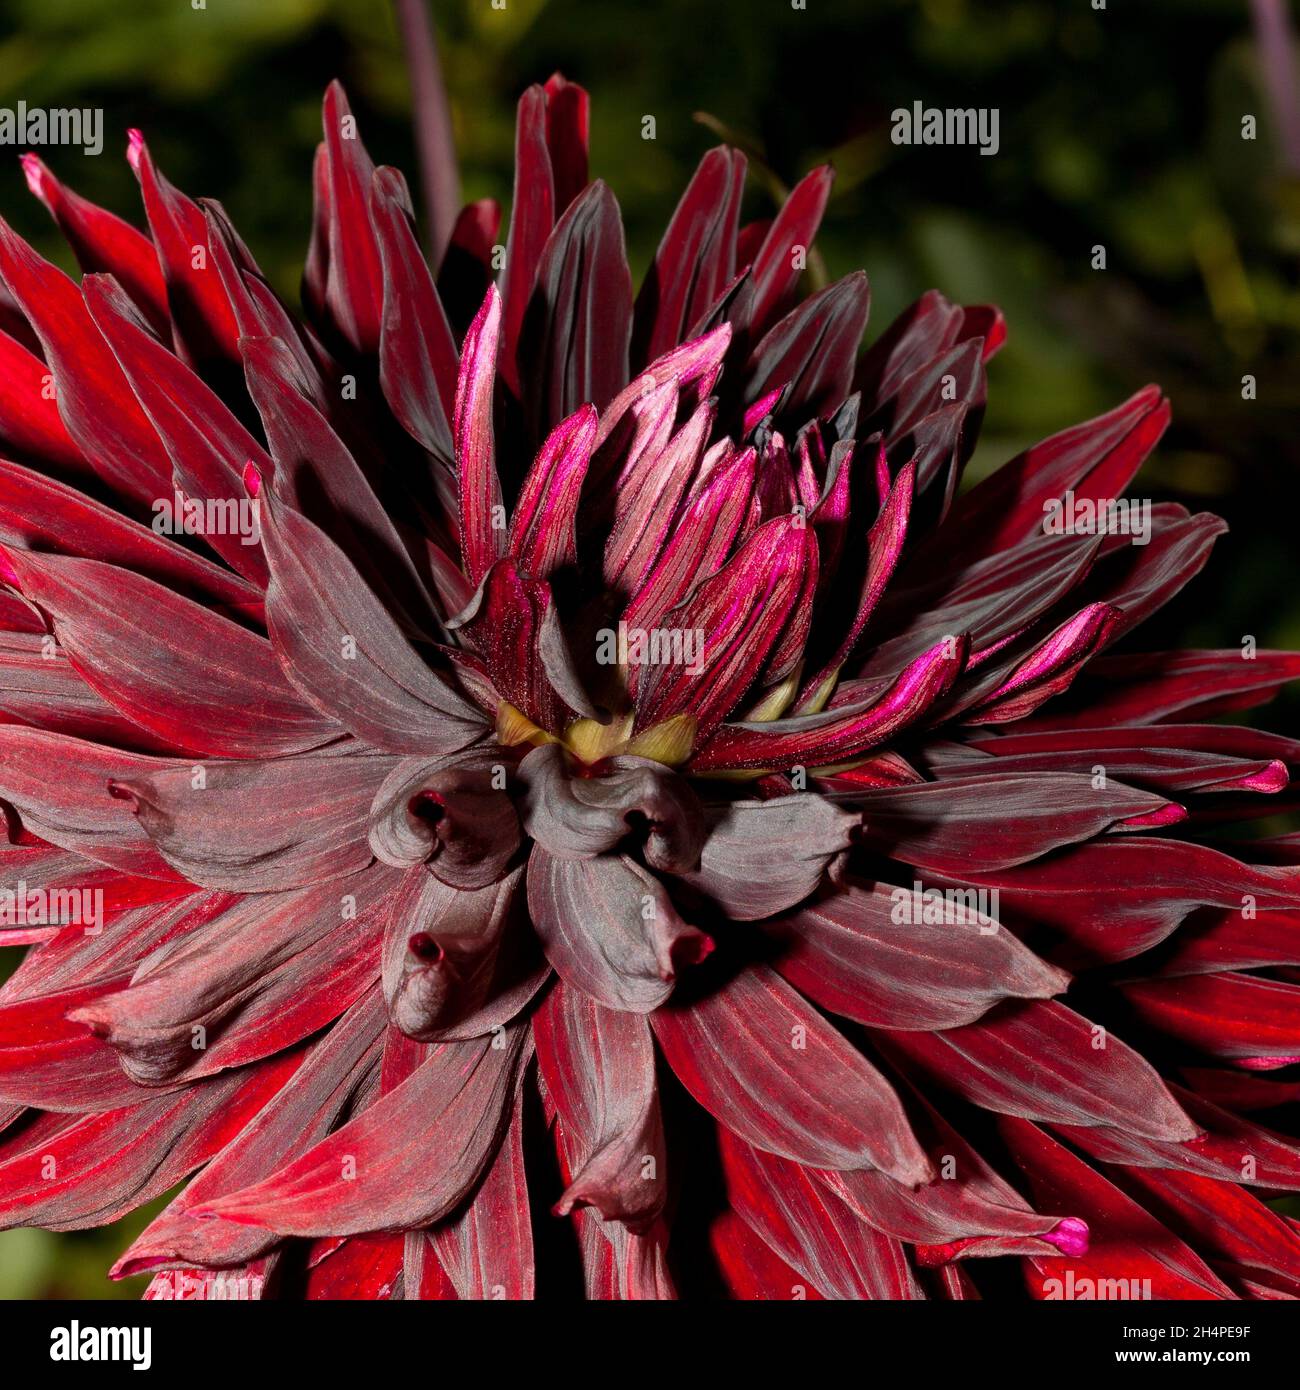 A deep red colored Dahlia flower Stock Photo